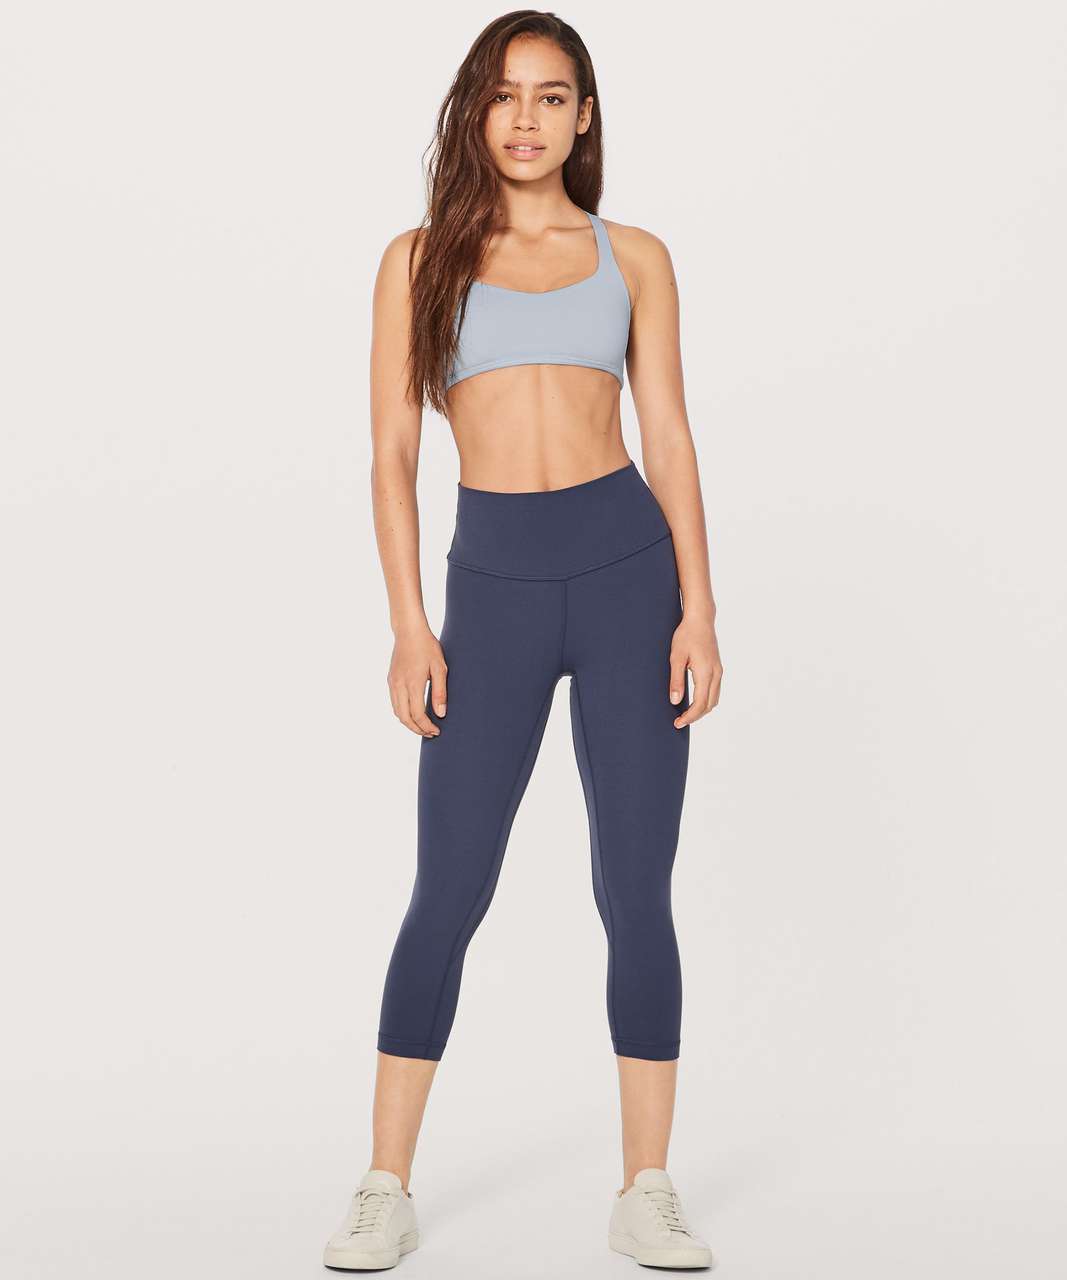 Lululemon Free to Be Bra - Wild *Light Support, A/B Cup - Hail